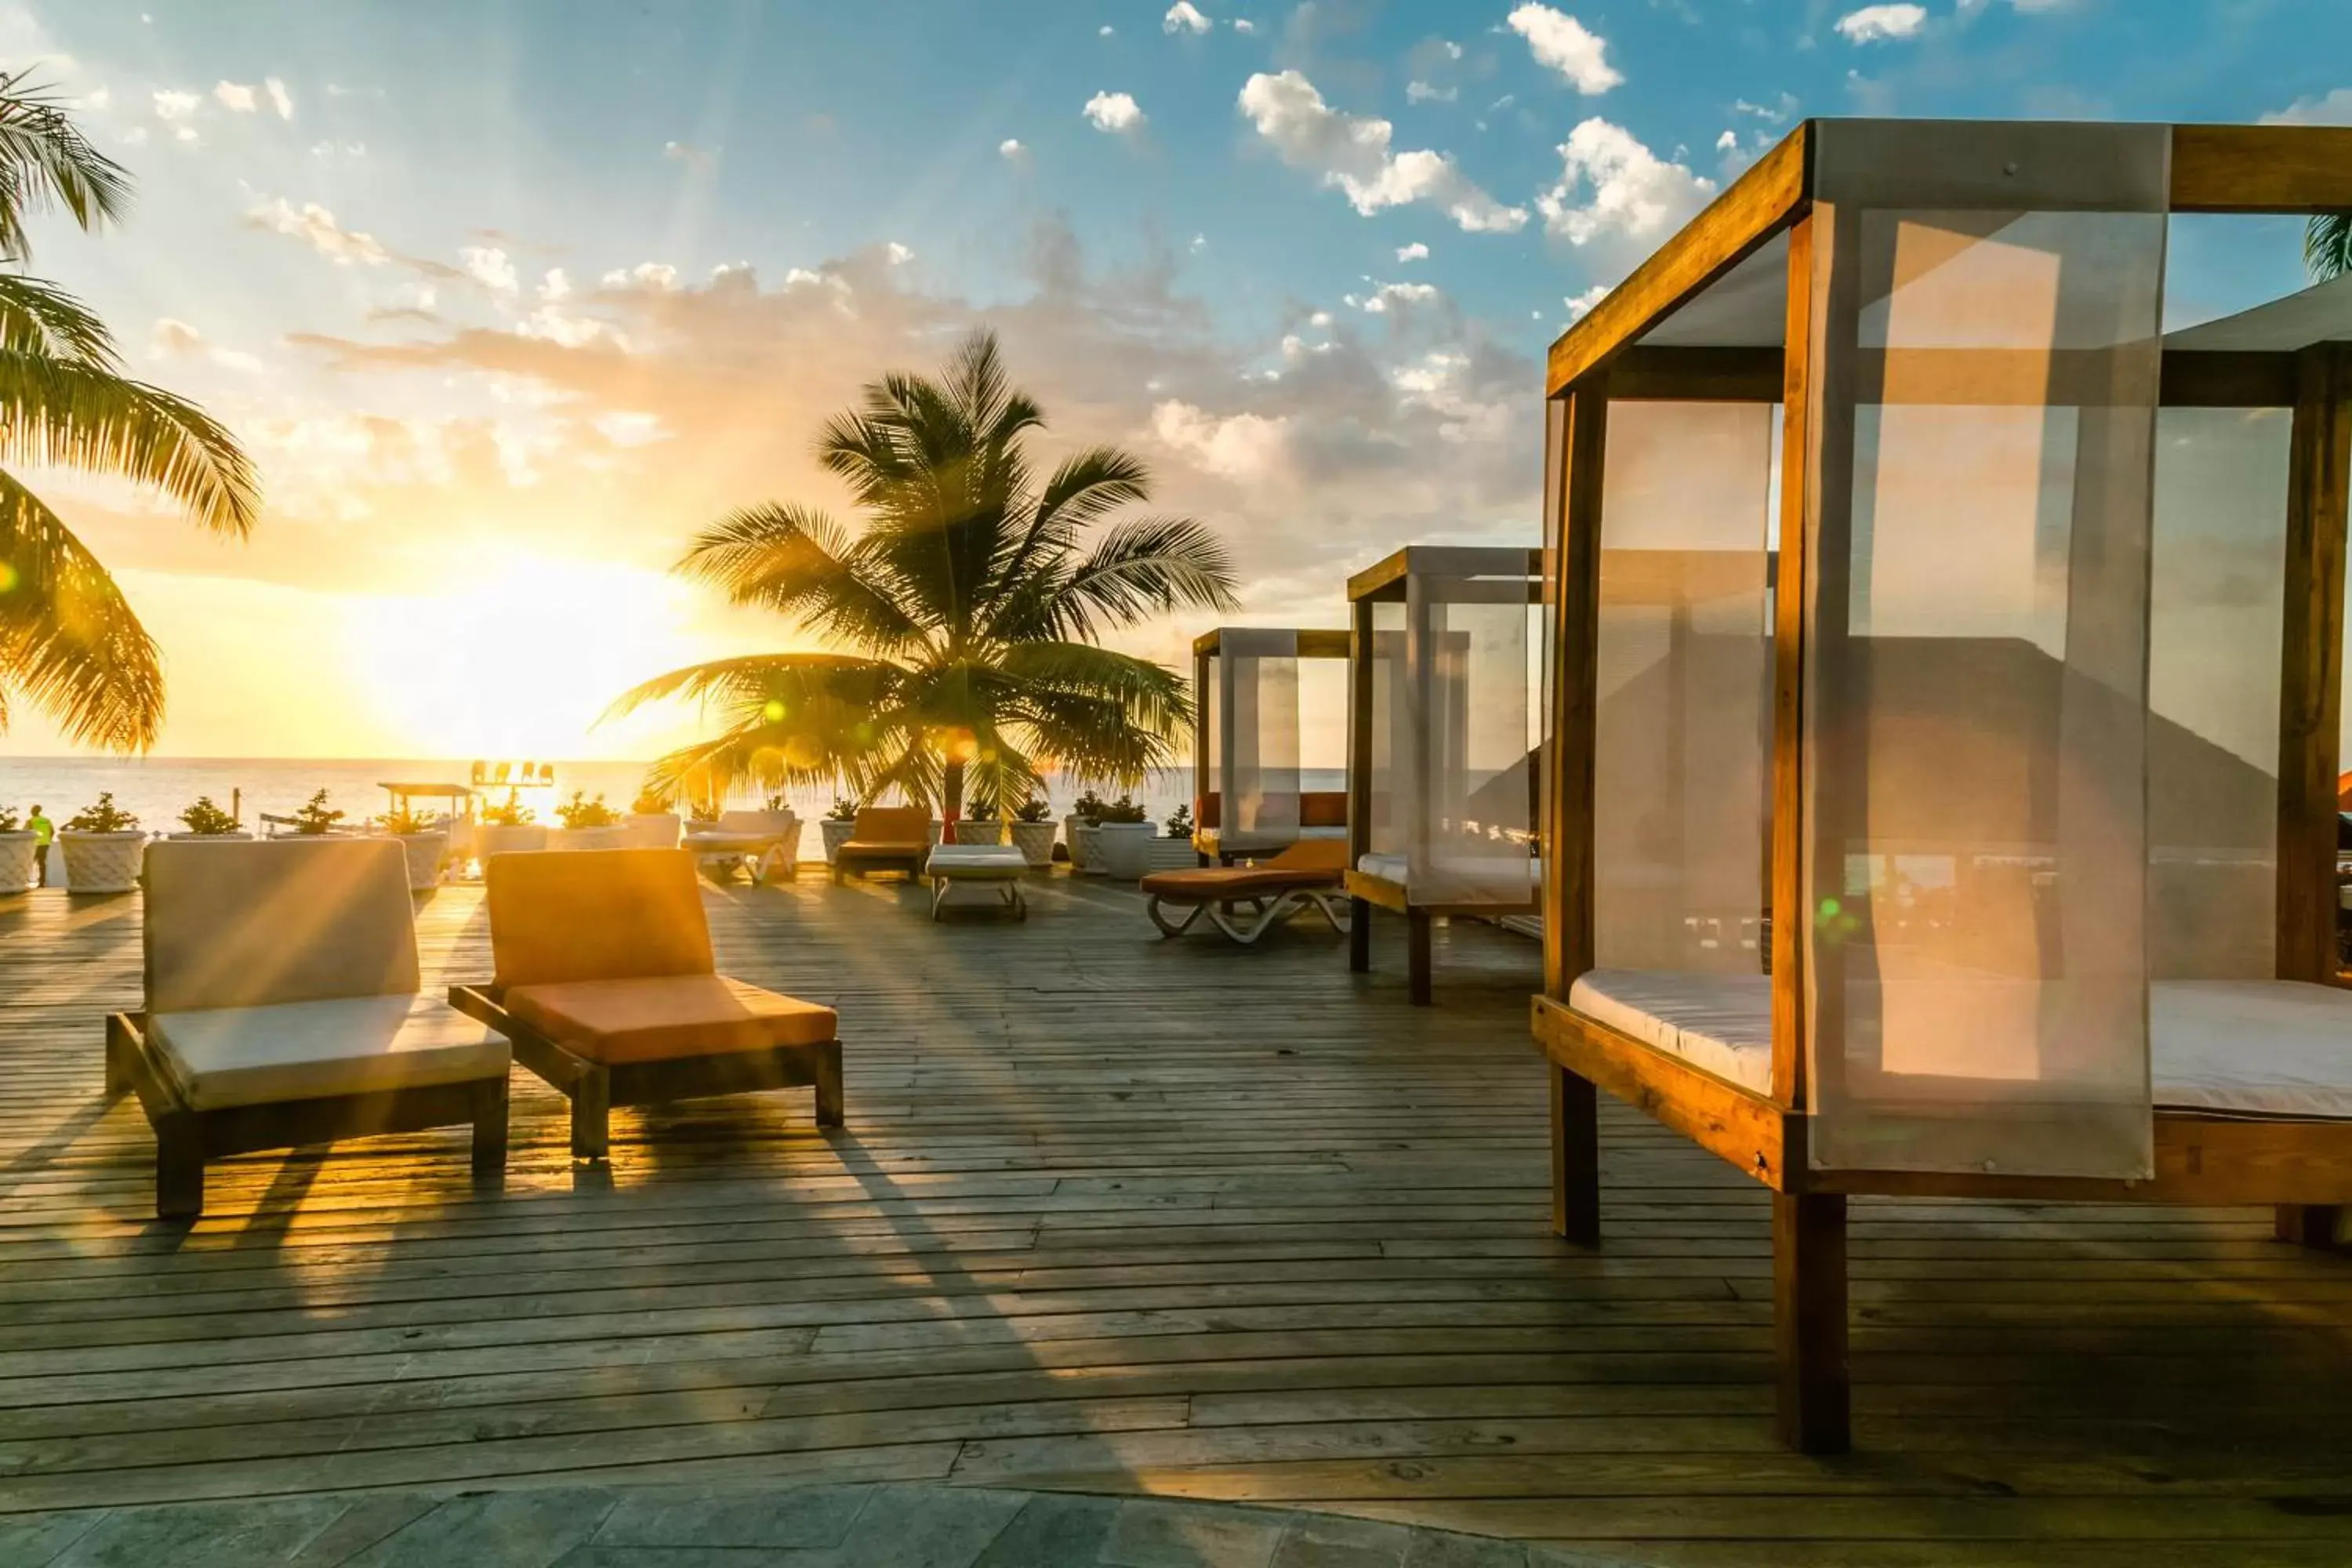 Patio, Sunrise/Sunset in Royal Decameron Montego Beach Resort - ALL INCLUSIVE